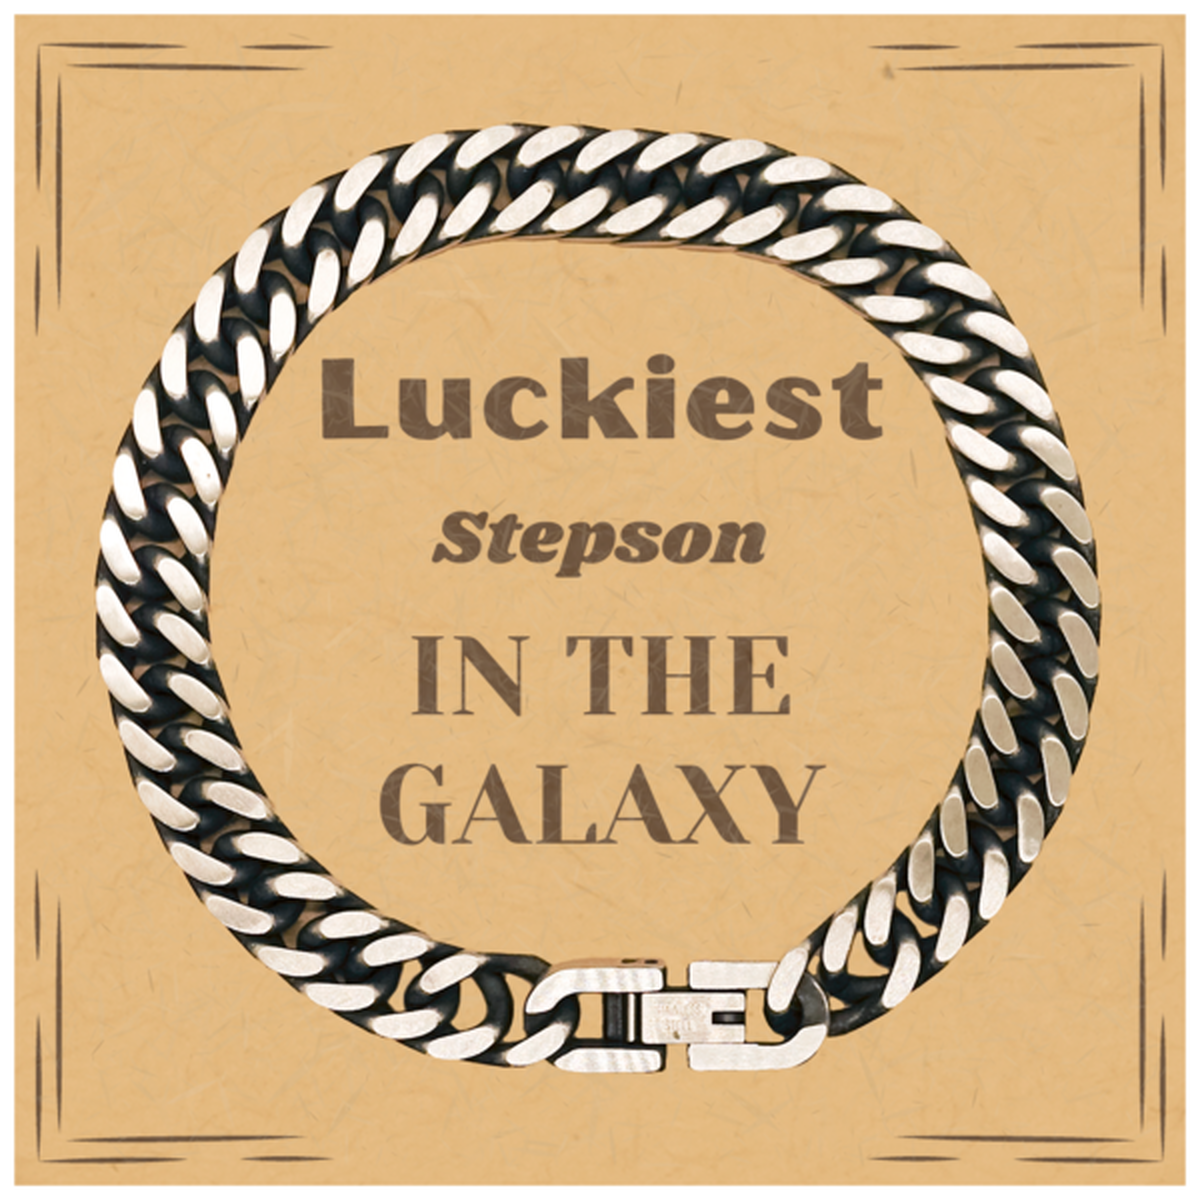 Luckiest Stepson in the Galaxy, To My Stepson Message Card Gifts, Christmas Stepson Cuban Link Chain Bracelet Gifts, X-mas Birthday Unique Gifts For Stepson Men Women